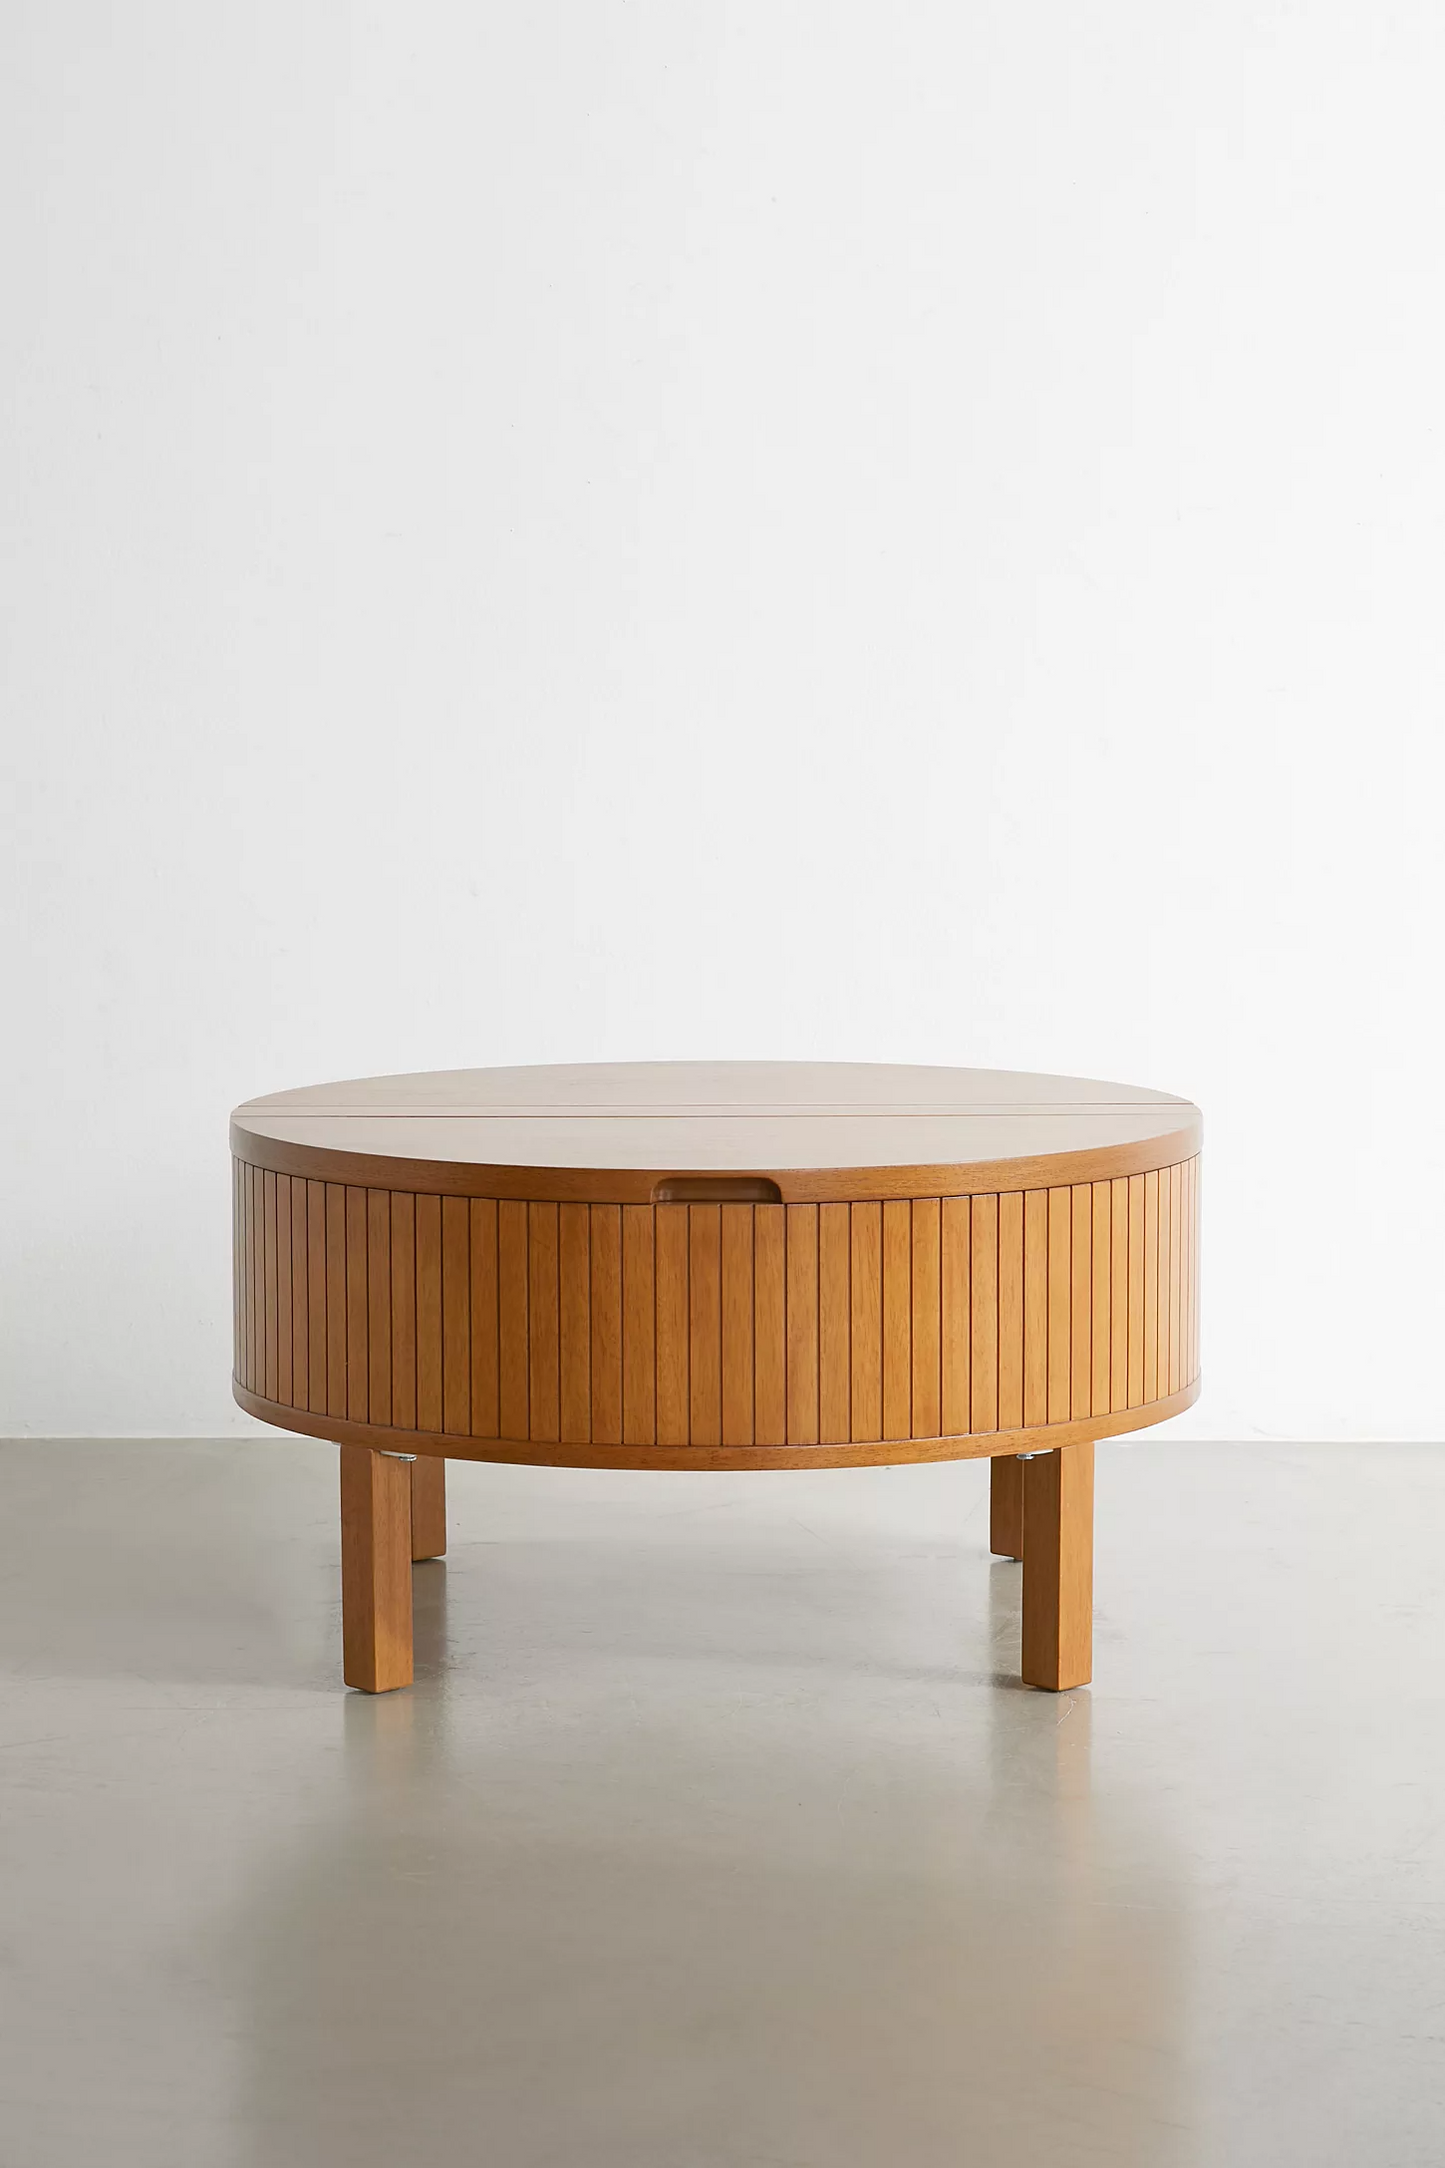 Barrel Shape Solid Wood Coffee Table With Storage